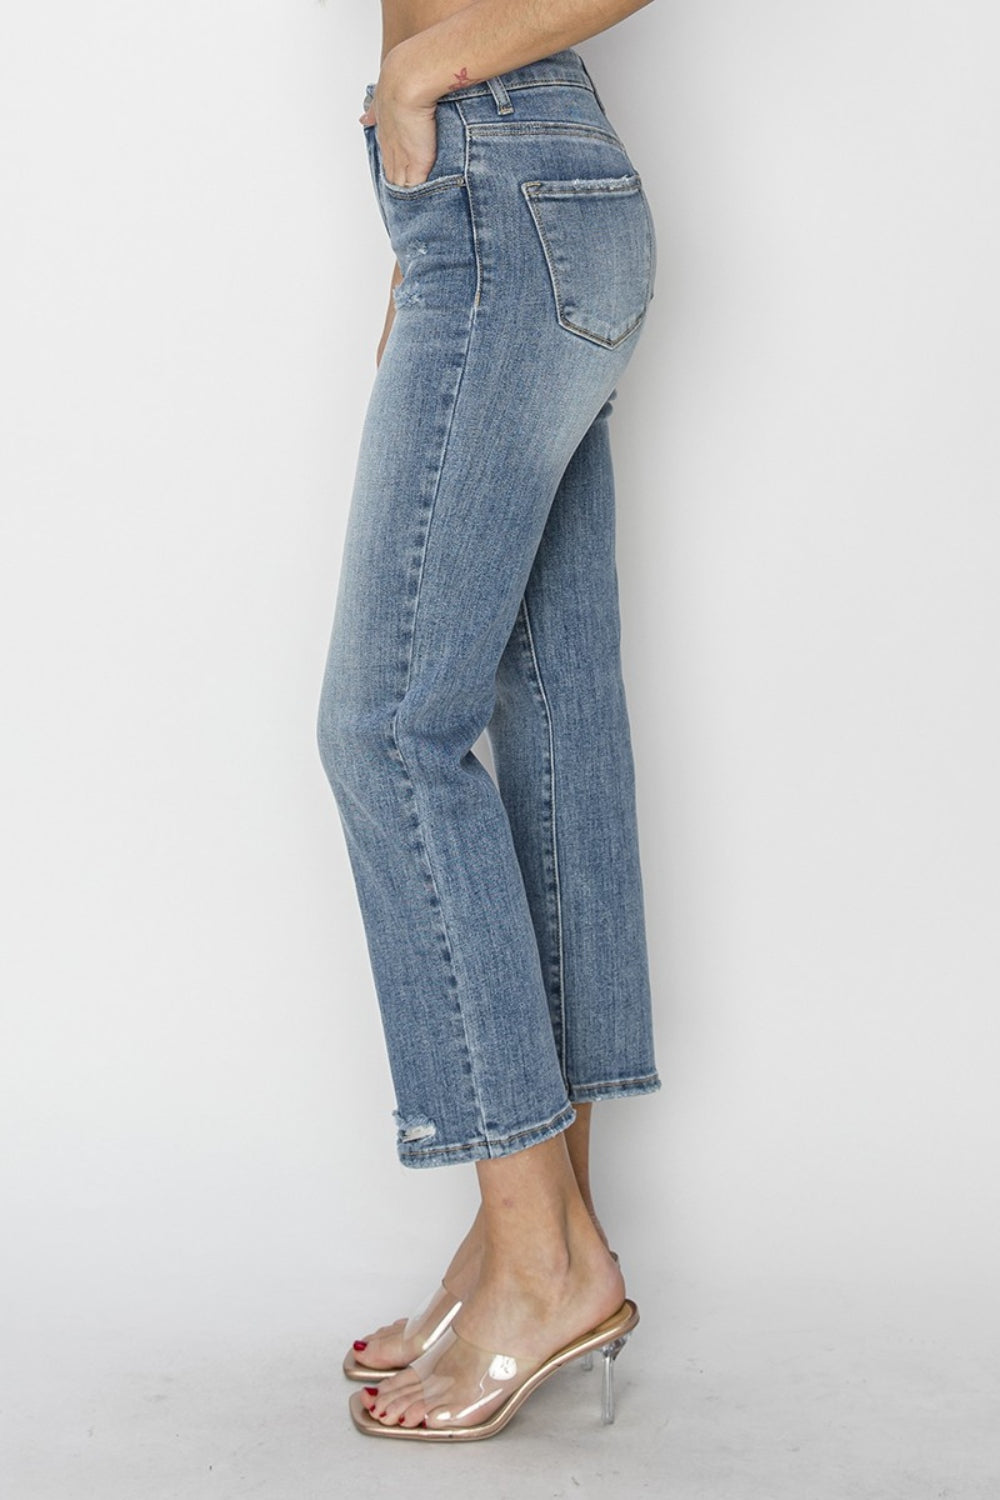 RISEN High Waist Distressed Cropped Jeans